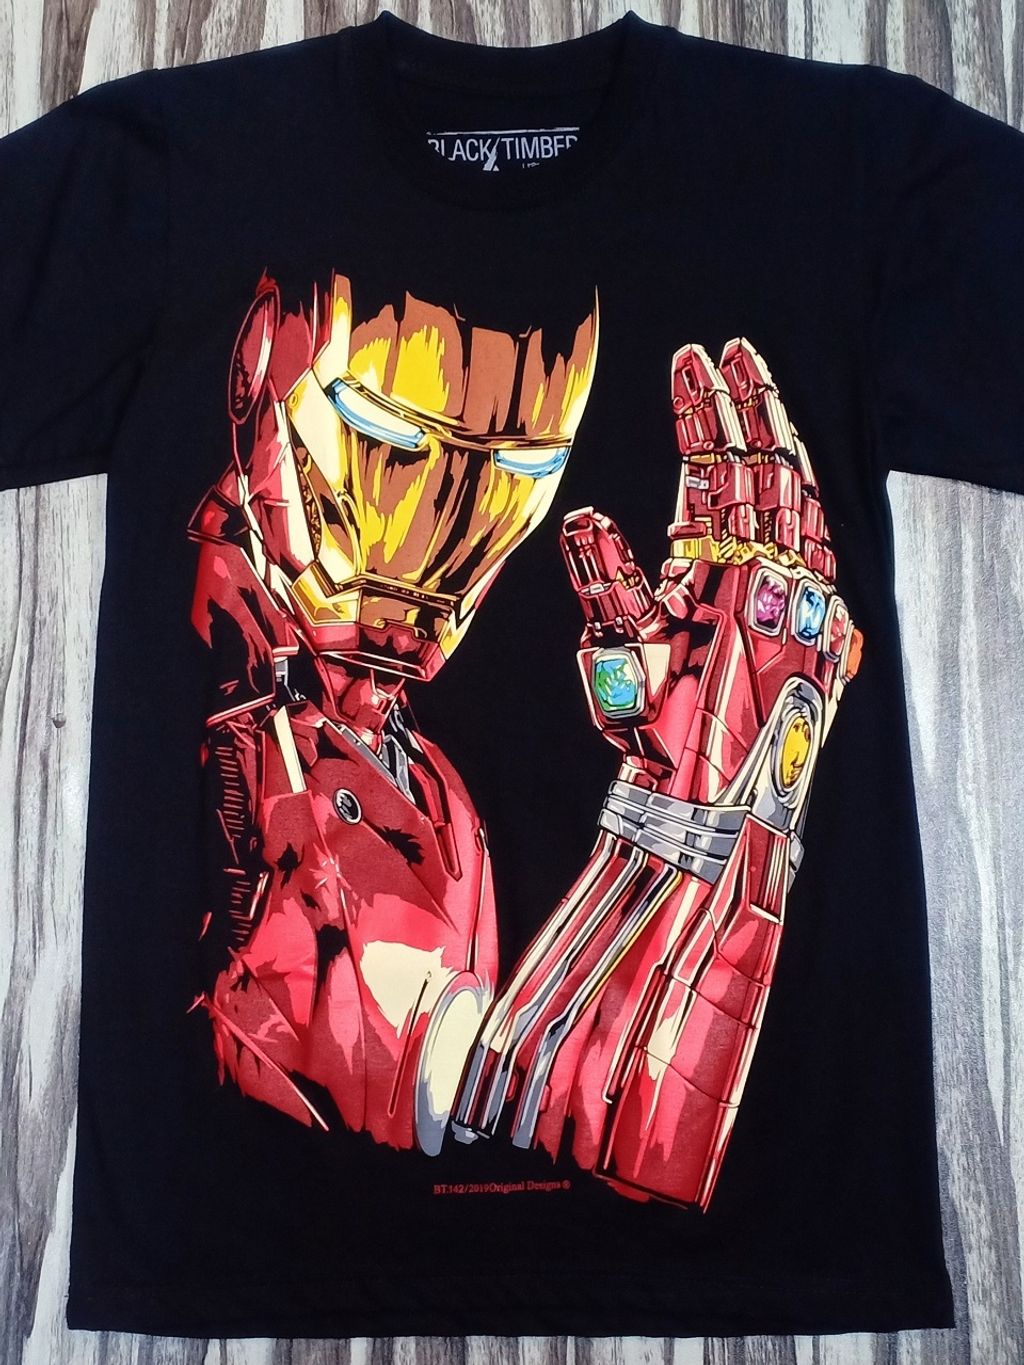 BT142 IRON MAN END MOAI NEW SCREEN SCREEN QUALITY SPEED SYSTEM QUALITY PREMIUM GAME GAUNTLET SILK UNIVERSE – TIMBER MARVEL T-SHIRT NANO BLACK SILK BLACK TYPE HIGH HIGH COTTON GRADE COLLECTABLE TIMBER